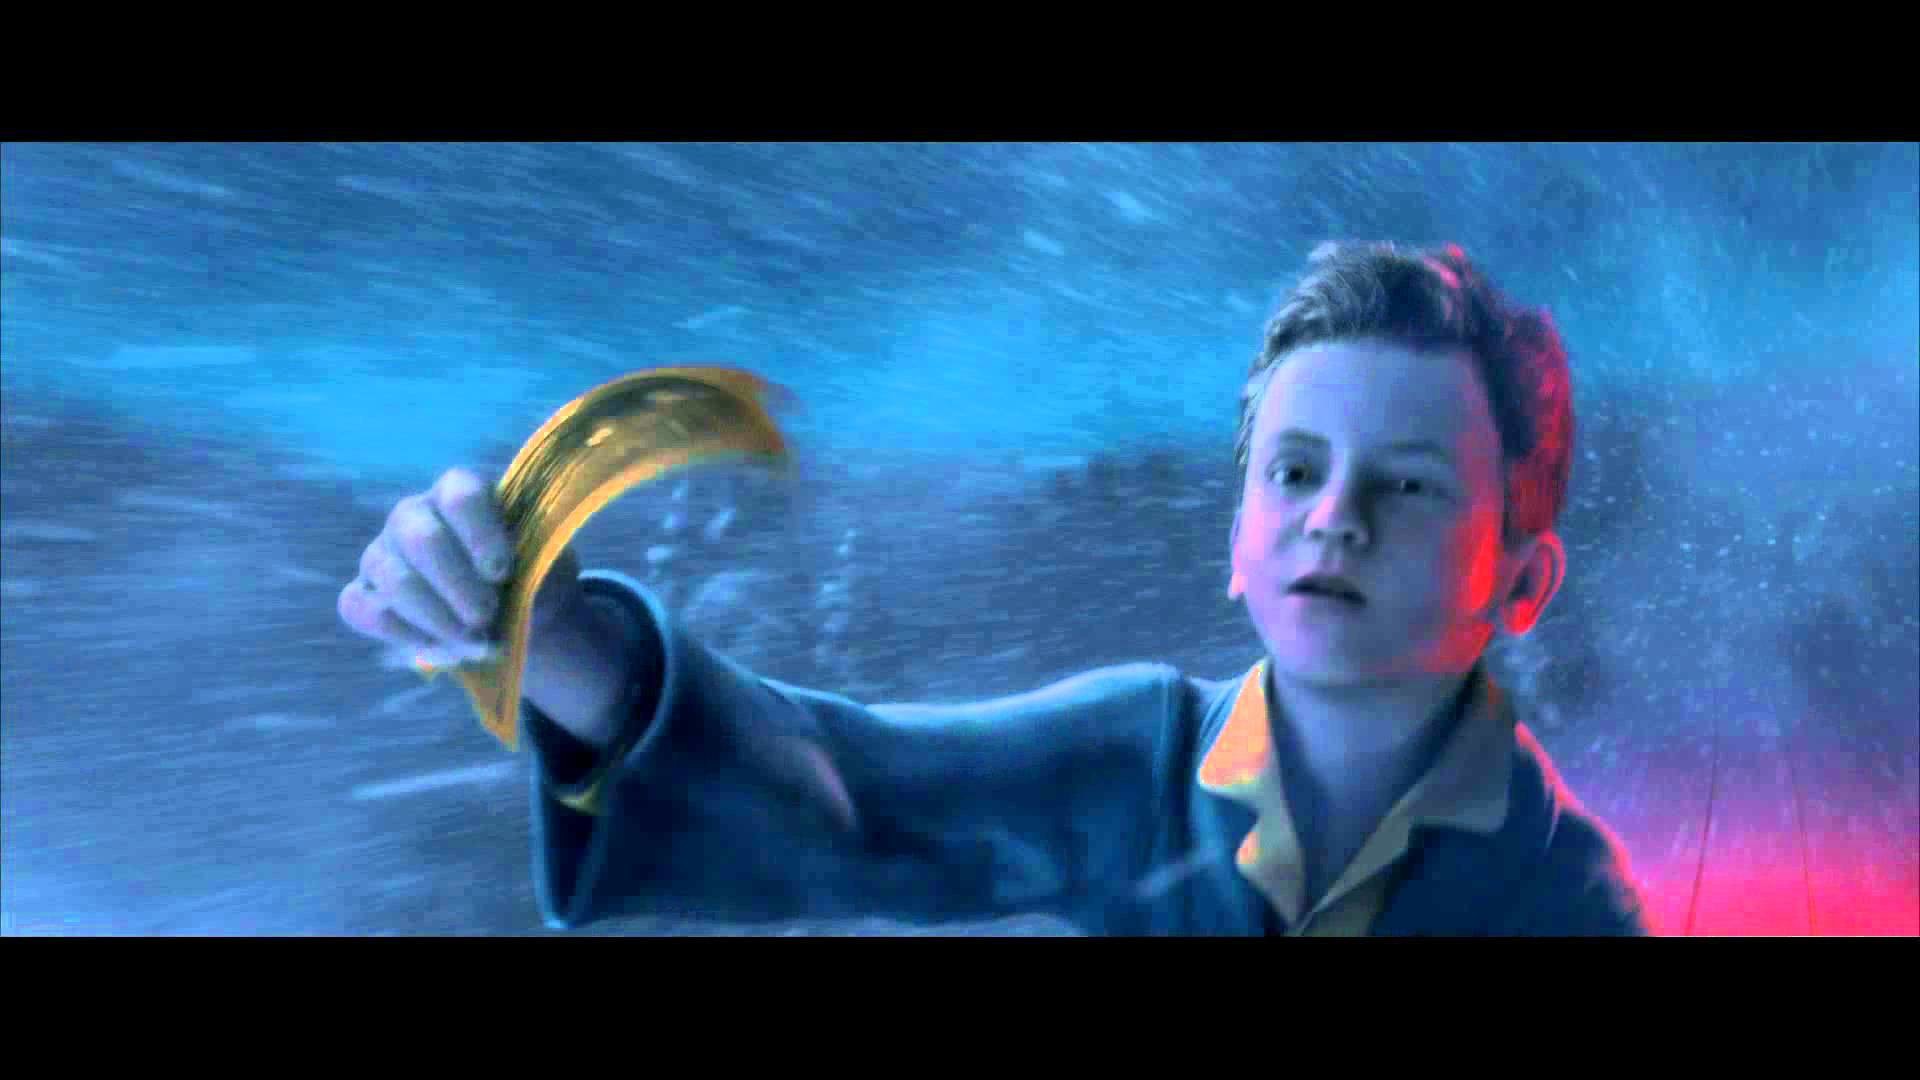 1920x1080 The Polar Express - Clip: "She's in a Big Trouble" (2004) | HD - YouTube